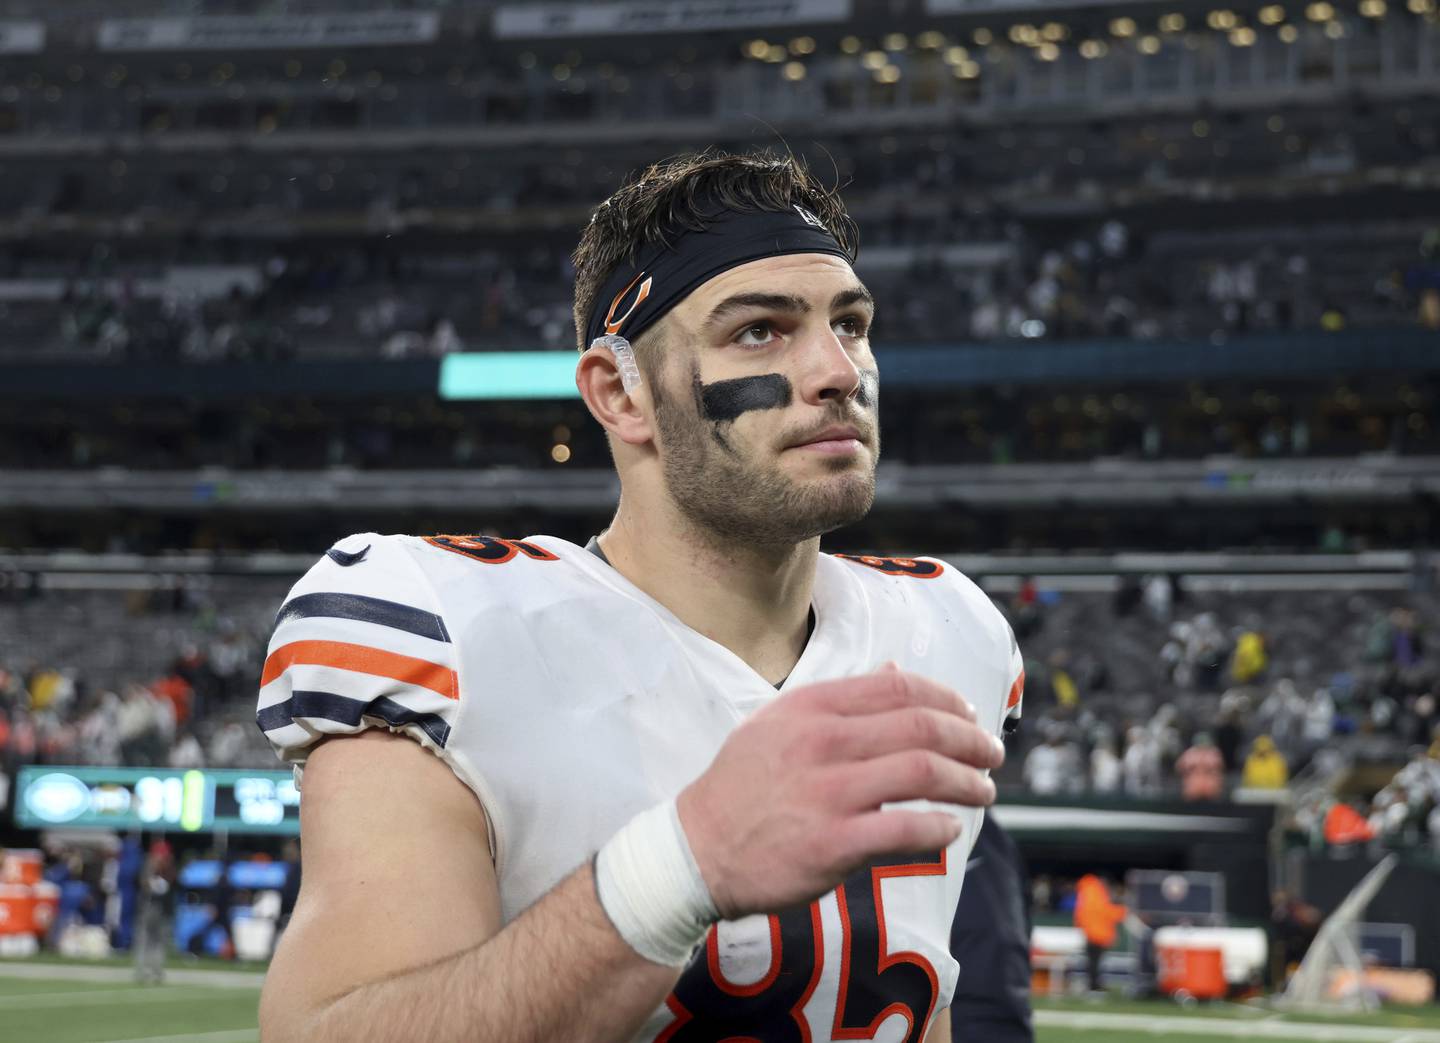 Bears tight end Cole Kmet heads off the field after a 31-10 loss to the Jets on Nov. 27, 2022, at MetLife Stadium in East Rutherford, N.J.